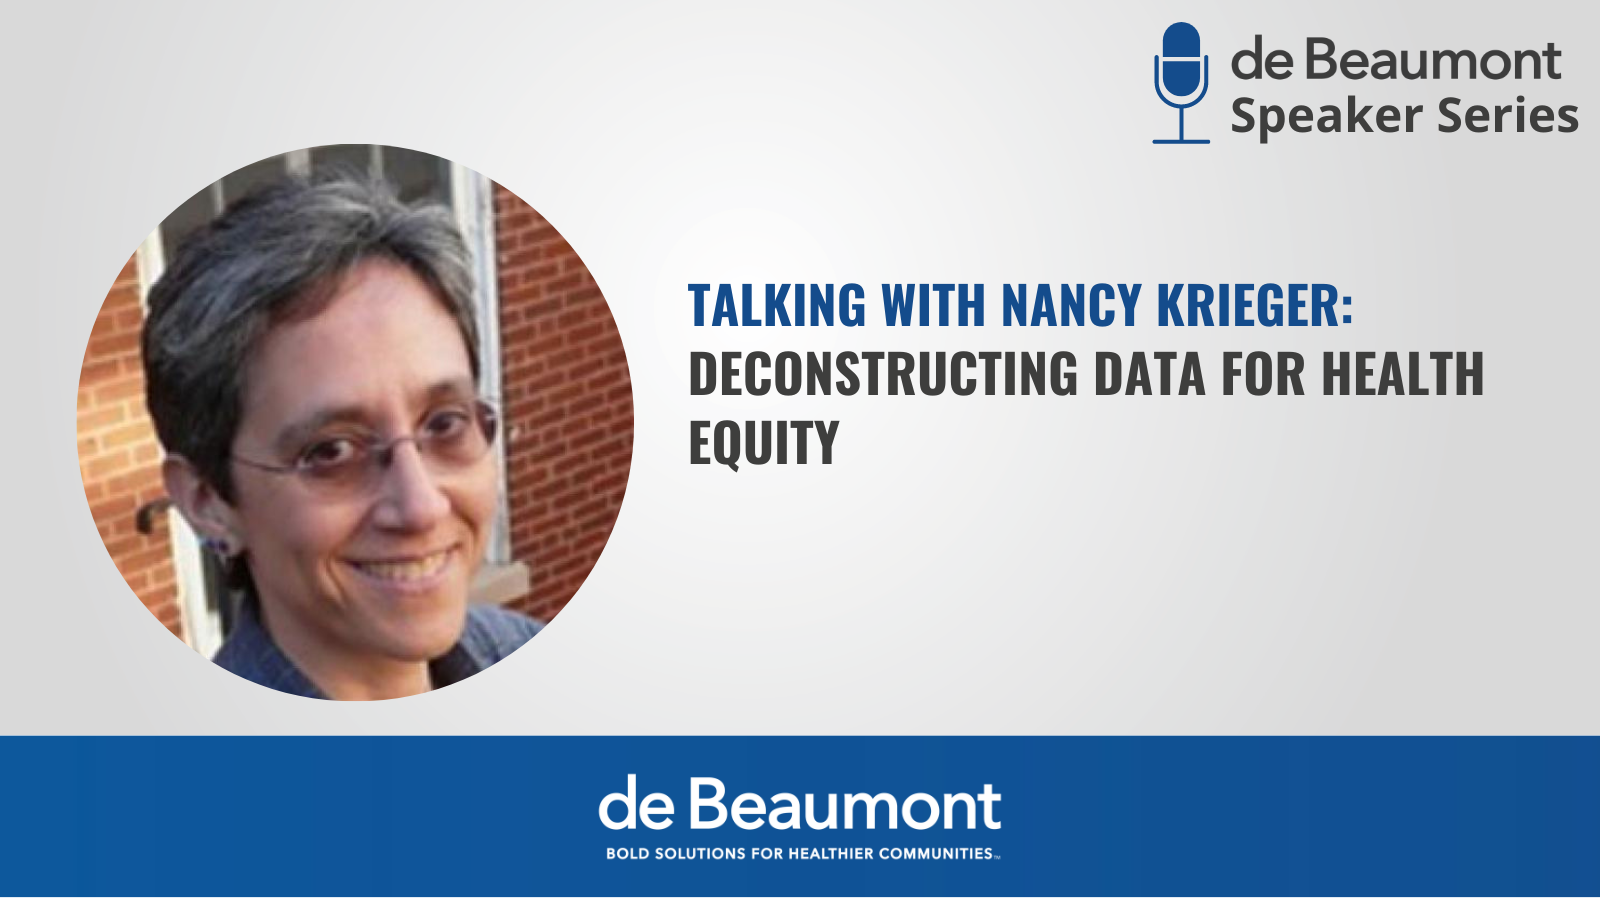 Header image with headshot of Nancy Krieger. Title reads "Talking With Nancy Krieger: Deconstructing Data for Health Equity."